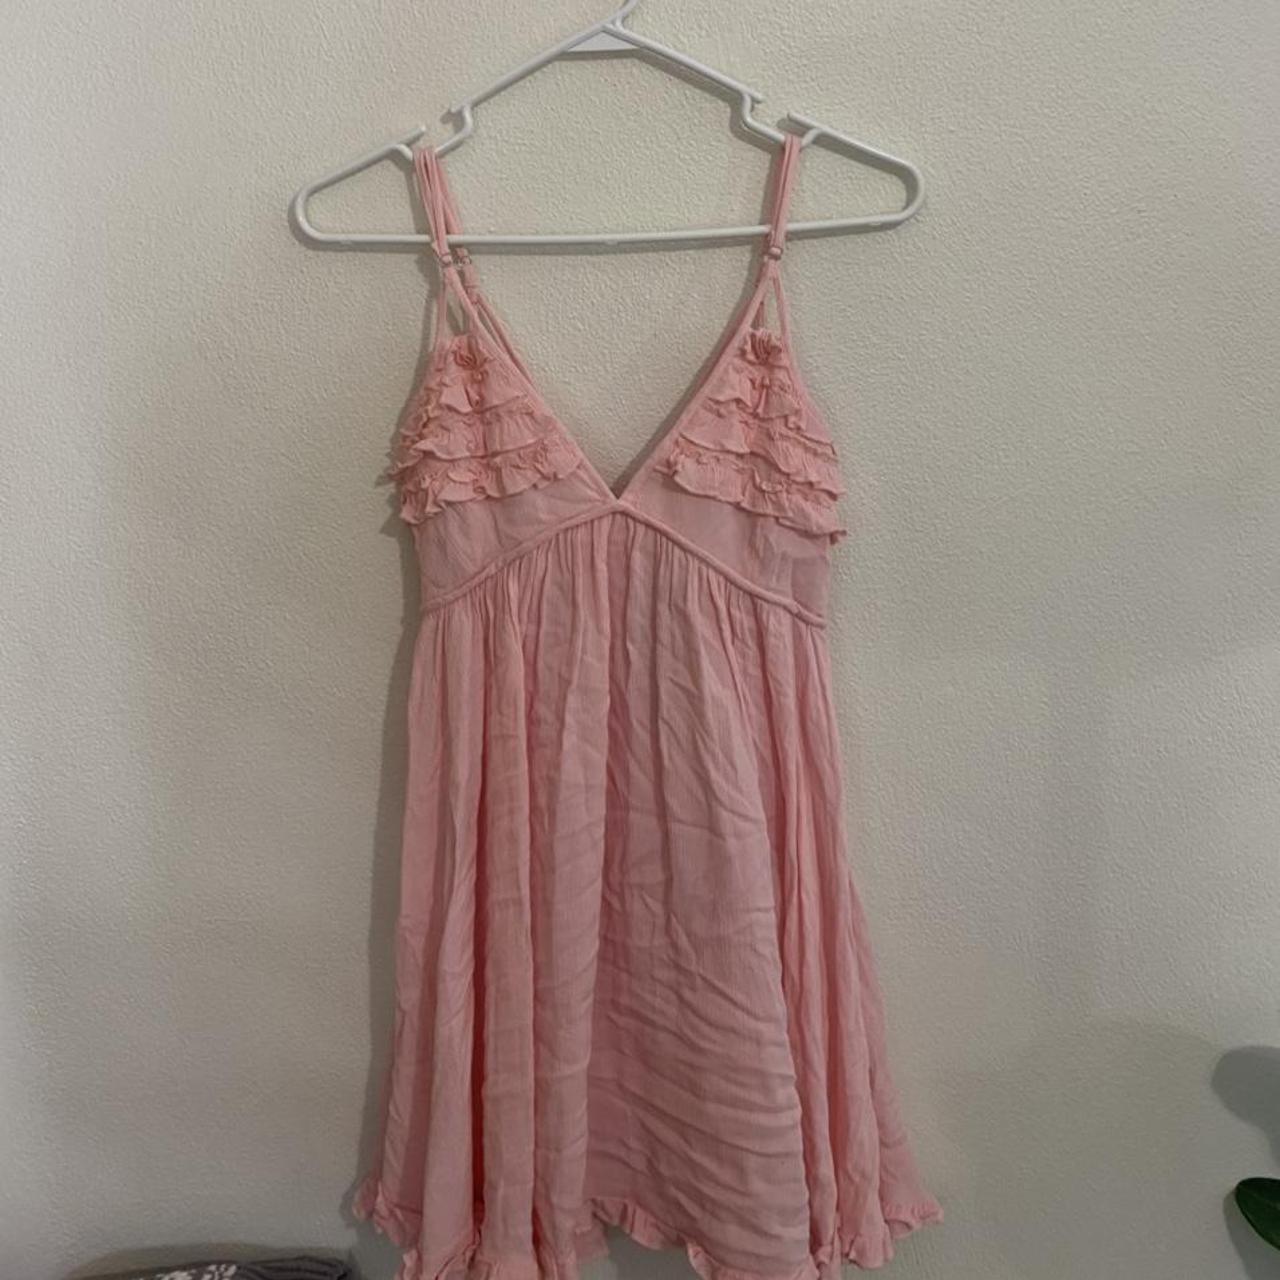 Product Image 1 - Apricot lame dress. Cute vacation